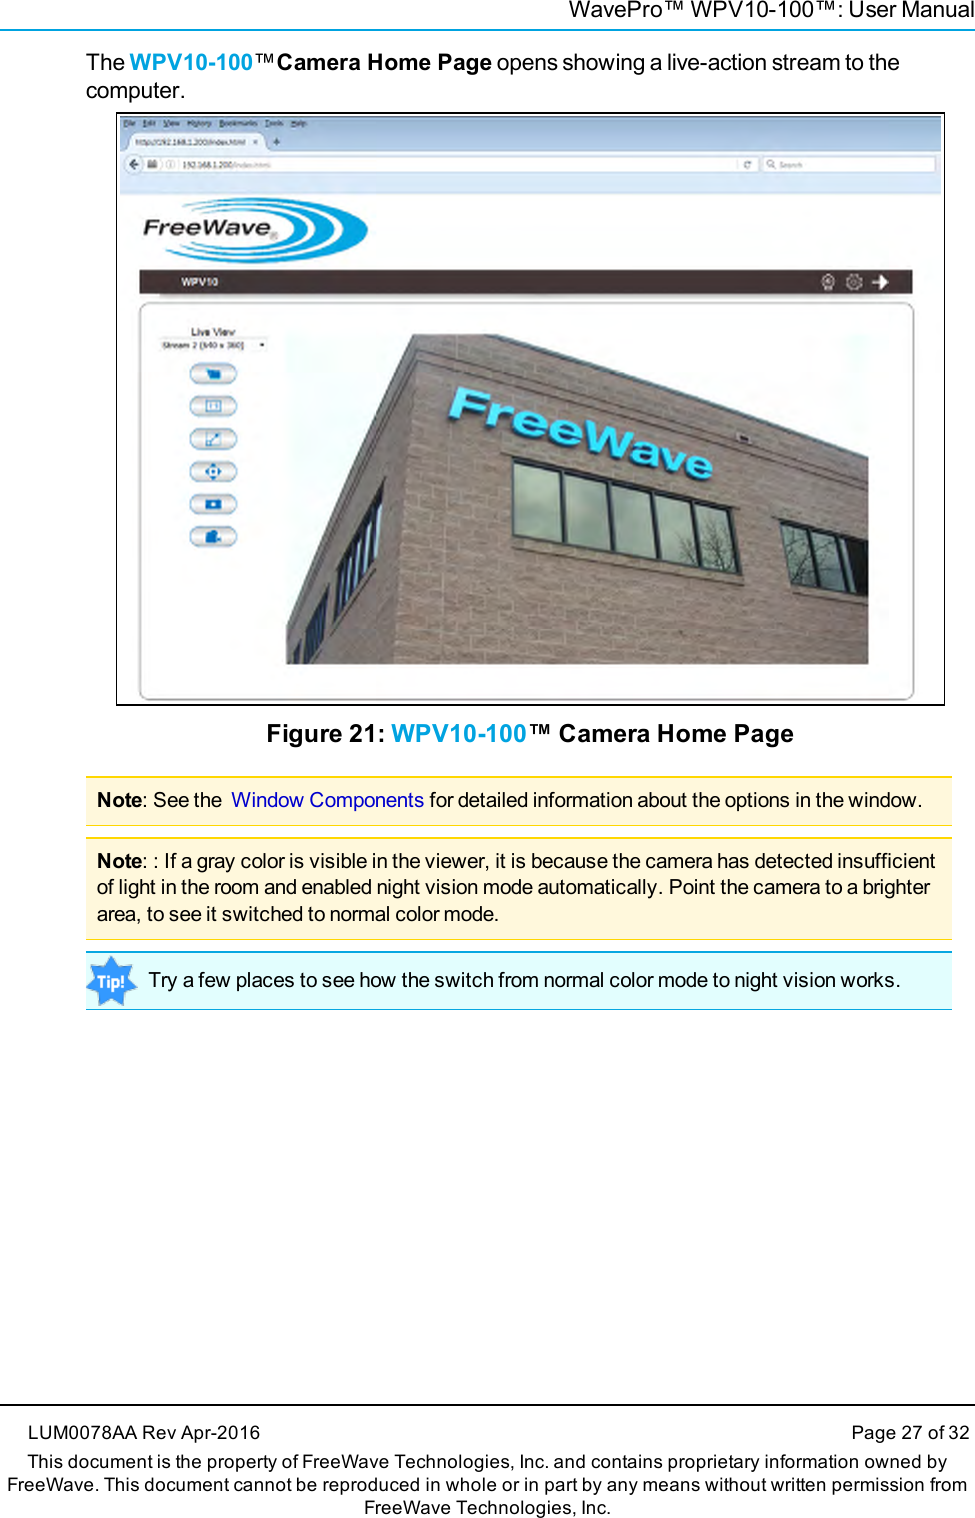 WavePro™ WPV10-100™: User ManualThe WPV10-100™Camera Home Page opens showing a live-action stream to thecomputer.Figure 21: WPV10-100™ Camera Home PageNote: See the Window Components for detailed information about the options in the window.Note: : If a gray color is visible in the viewer, it is because the camera has detected insufficientof light in the room and enabled night vision mode automatically. Point the camera to a brighterarea, to see it switched to normal color mode.Try a few places to see how the switch from normal color mode to night vision works.LUM0078AA Rev Apr-2016 Page 27 of 32This document is the property of FreeWave Technologies, Inc. and contains proprietary information owned byFreeWave. This document cannot be reproduced in whole or in part by any means without written permission fromFreeWave Technologies, Inc.